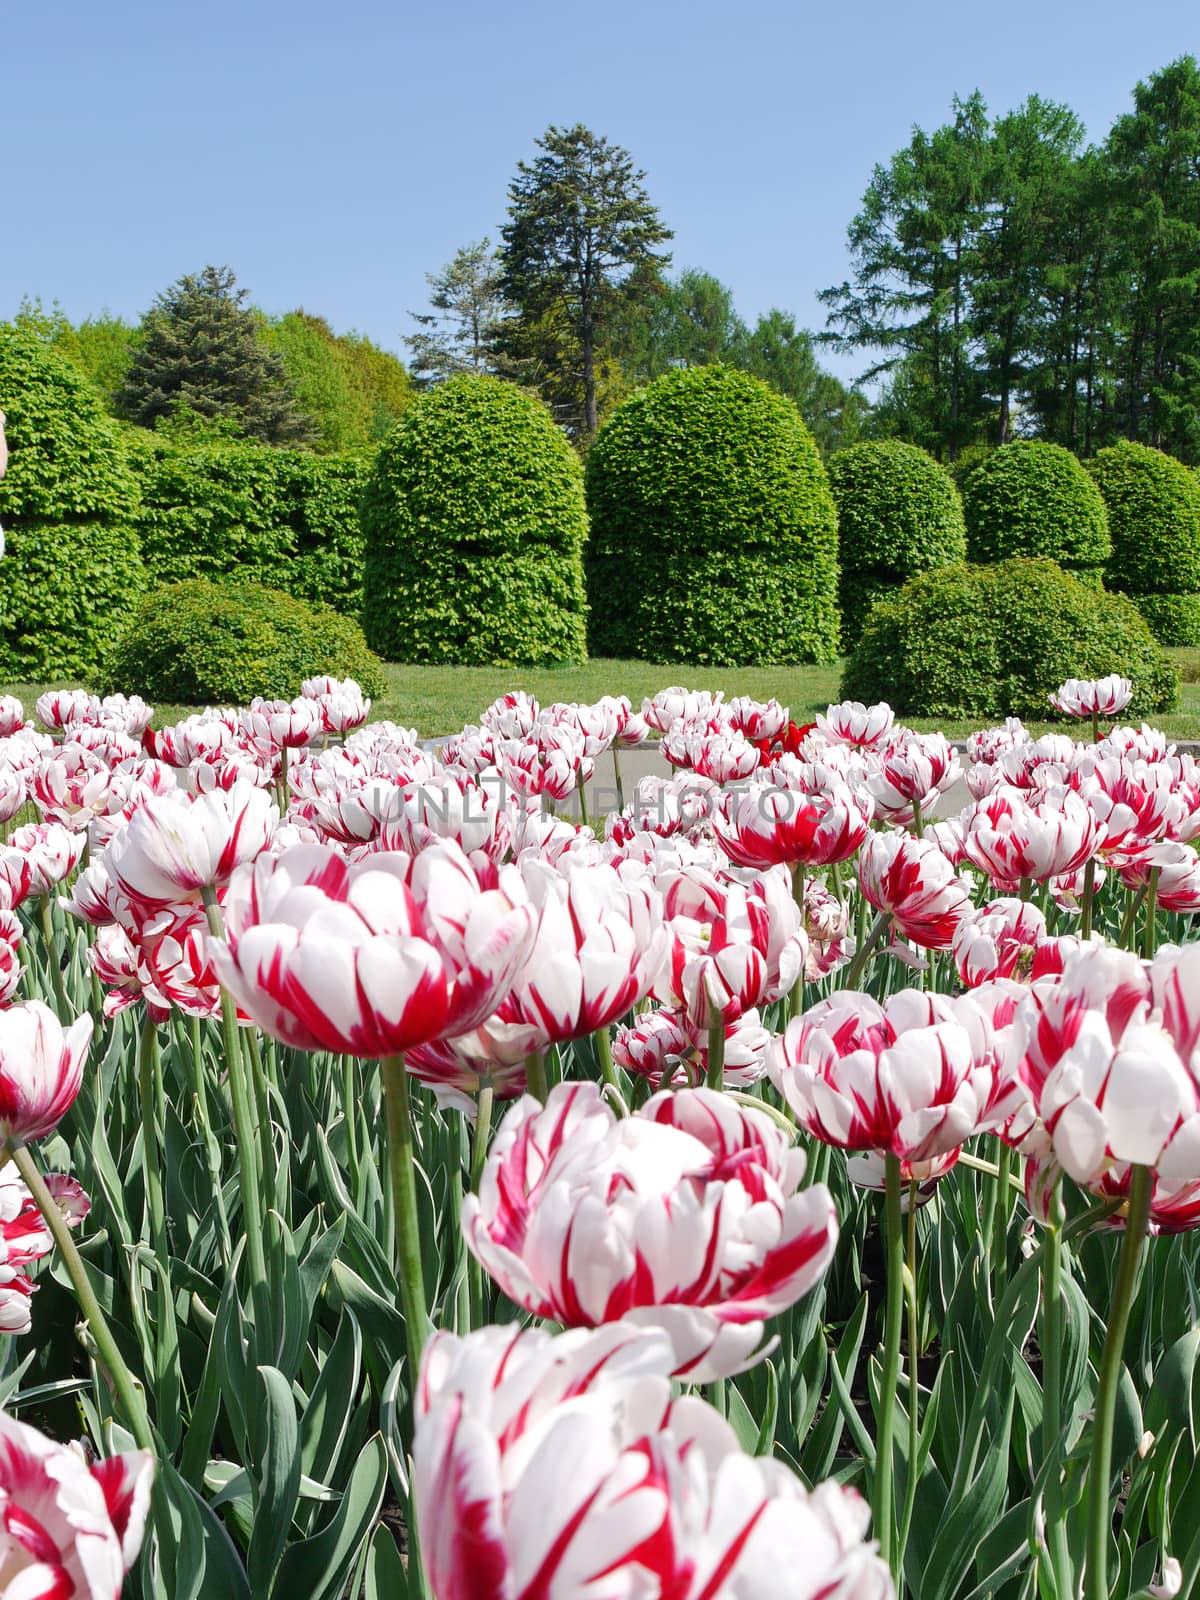 A flower bed with a huge number of red-and-white tulips against a background of trimmed green bushes by Adamchuk